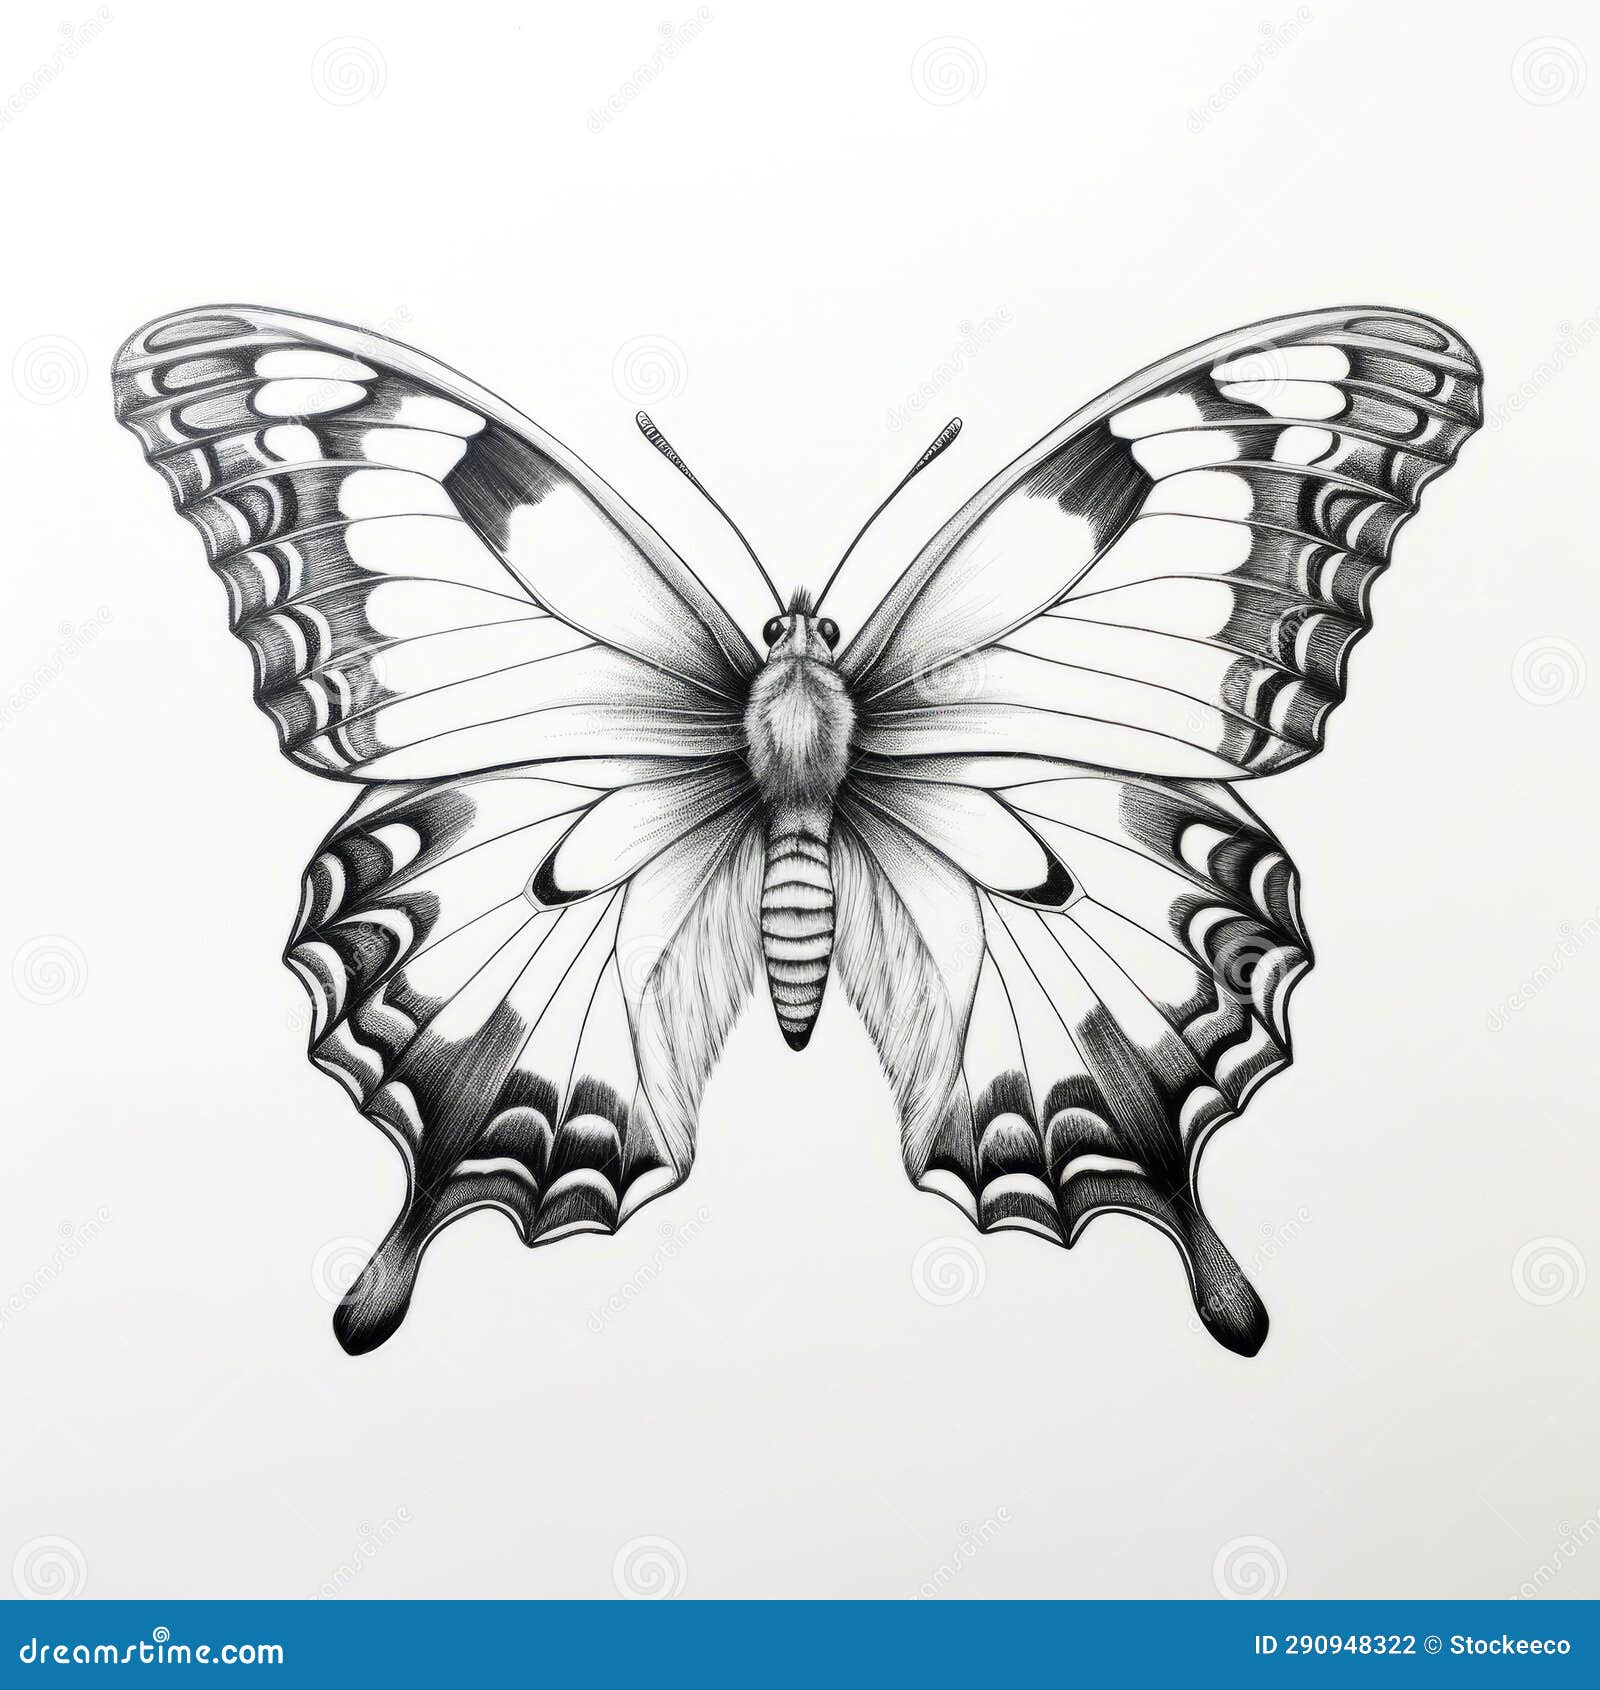 Contemporary Graphic Realism: Black and White Butterfly Drawing Stock ...